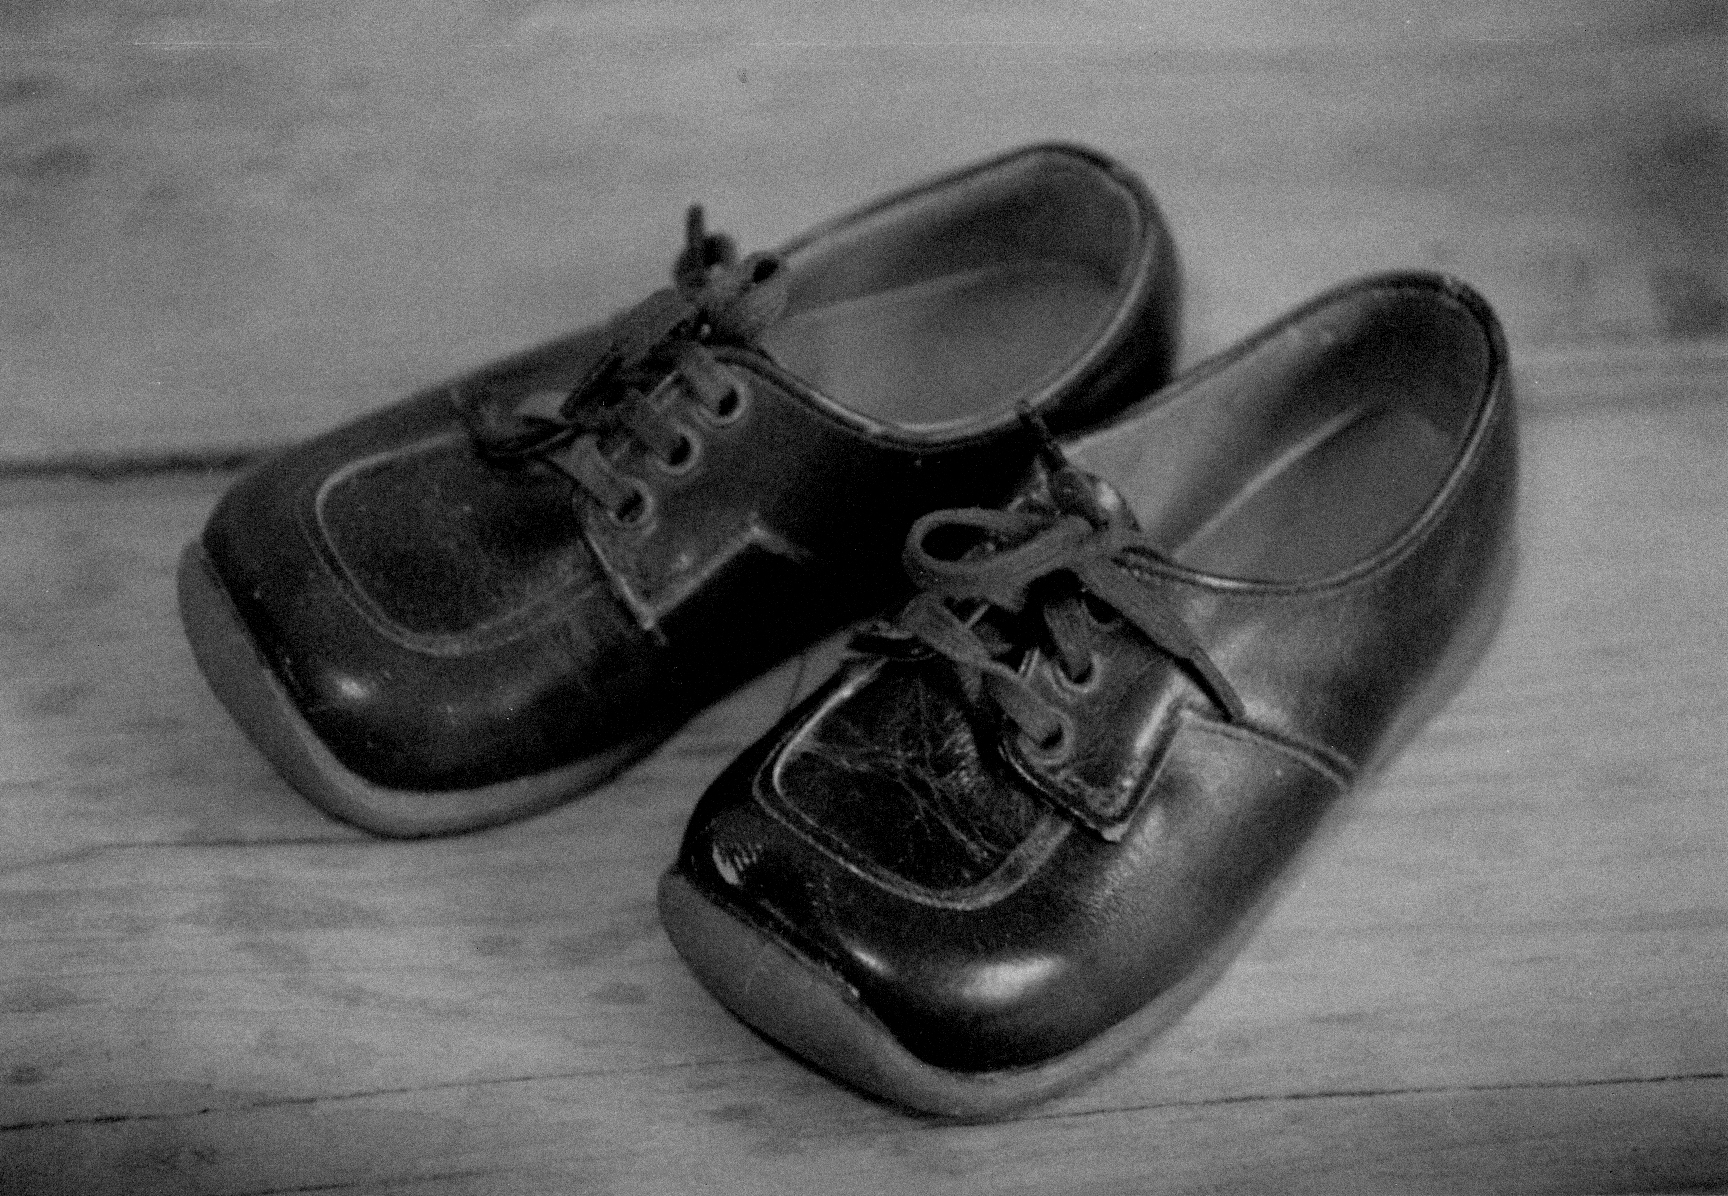 Small leather baby shoes, in black and white